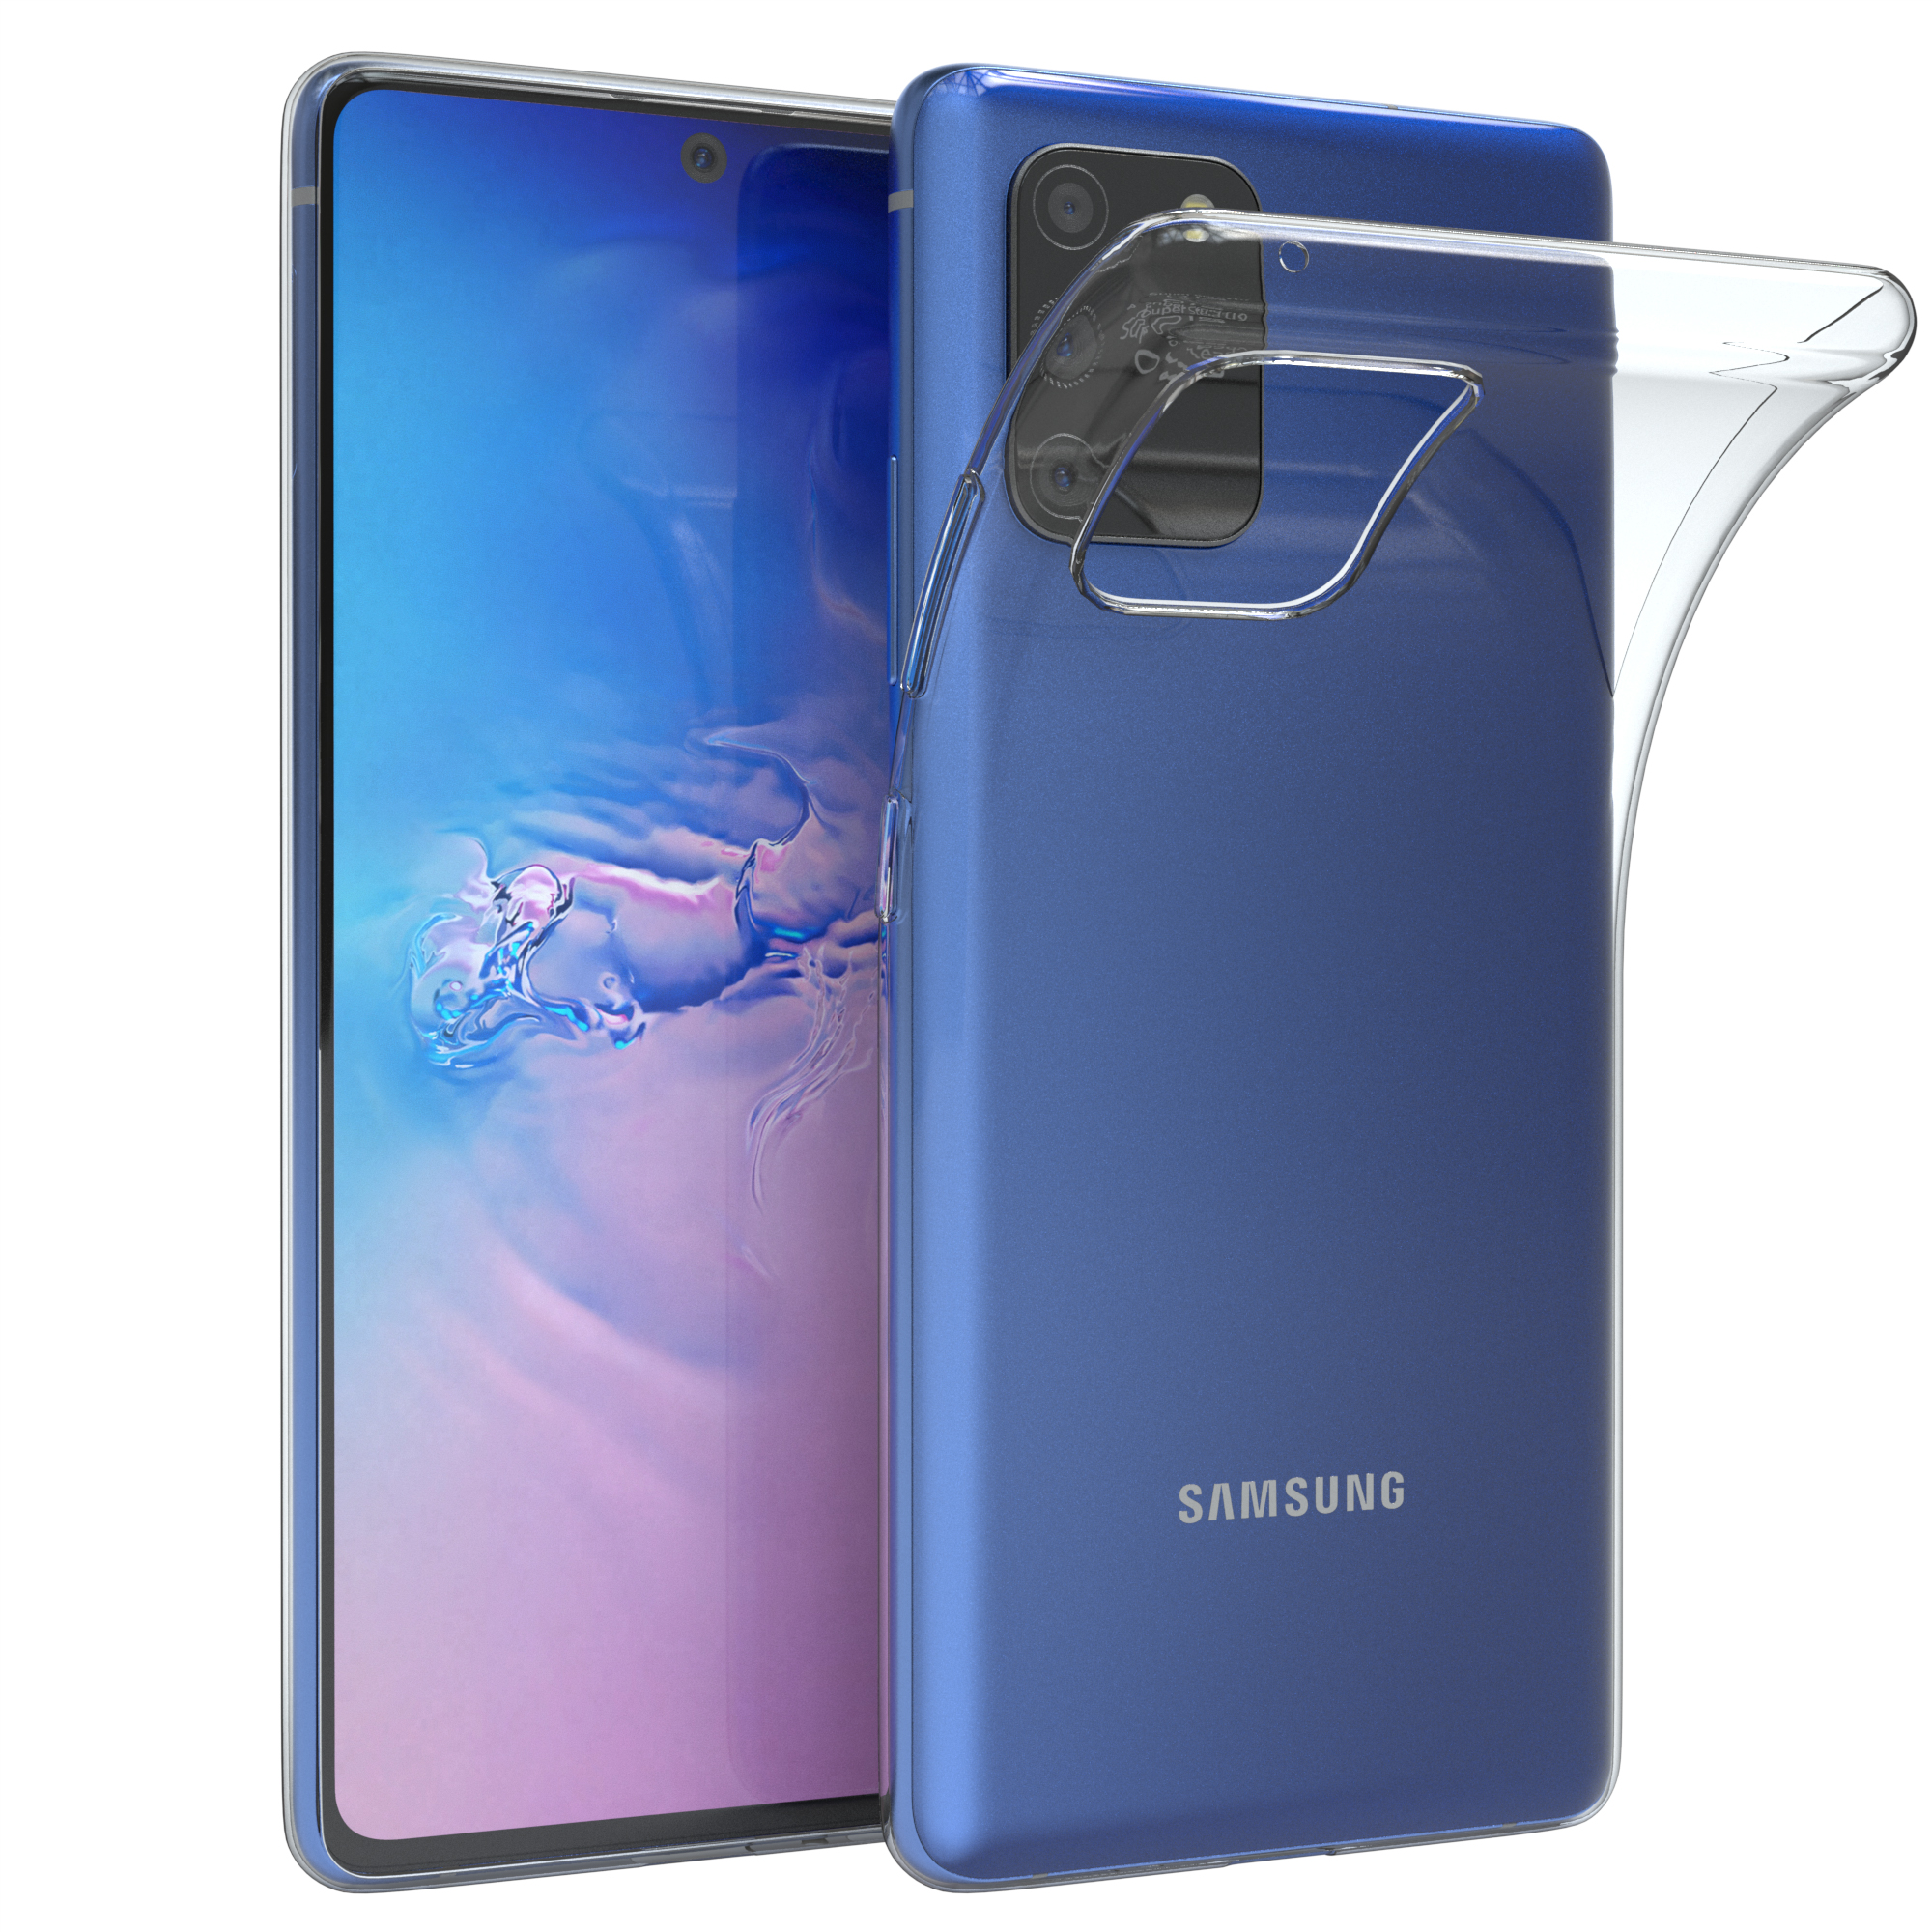 Backcover, S10 CASE Samsung, EAZY Galaxy Slimcover Durchsichtig Lite, Clear,